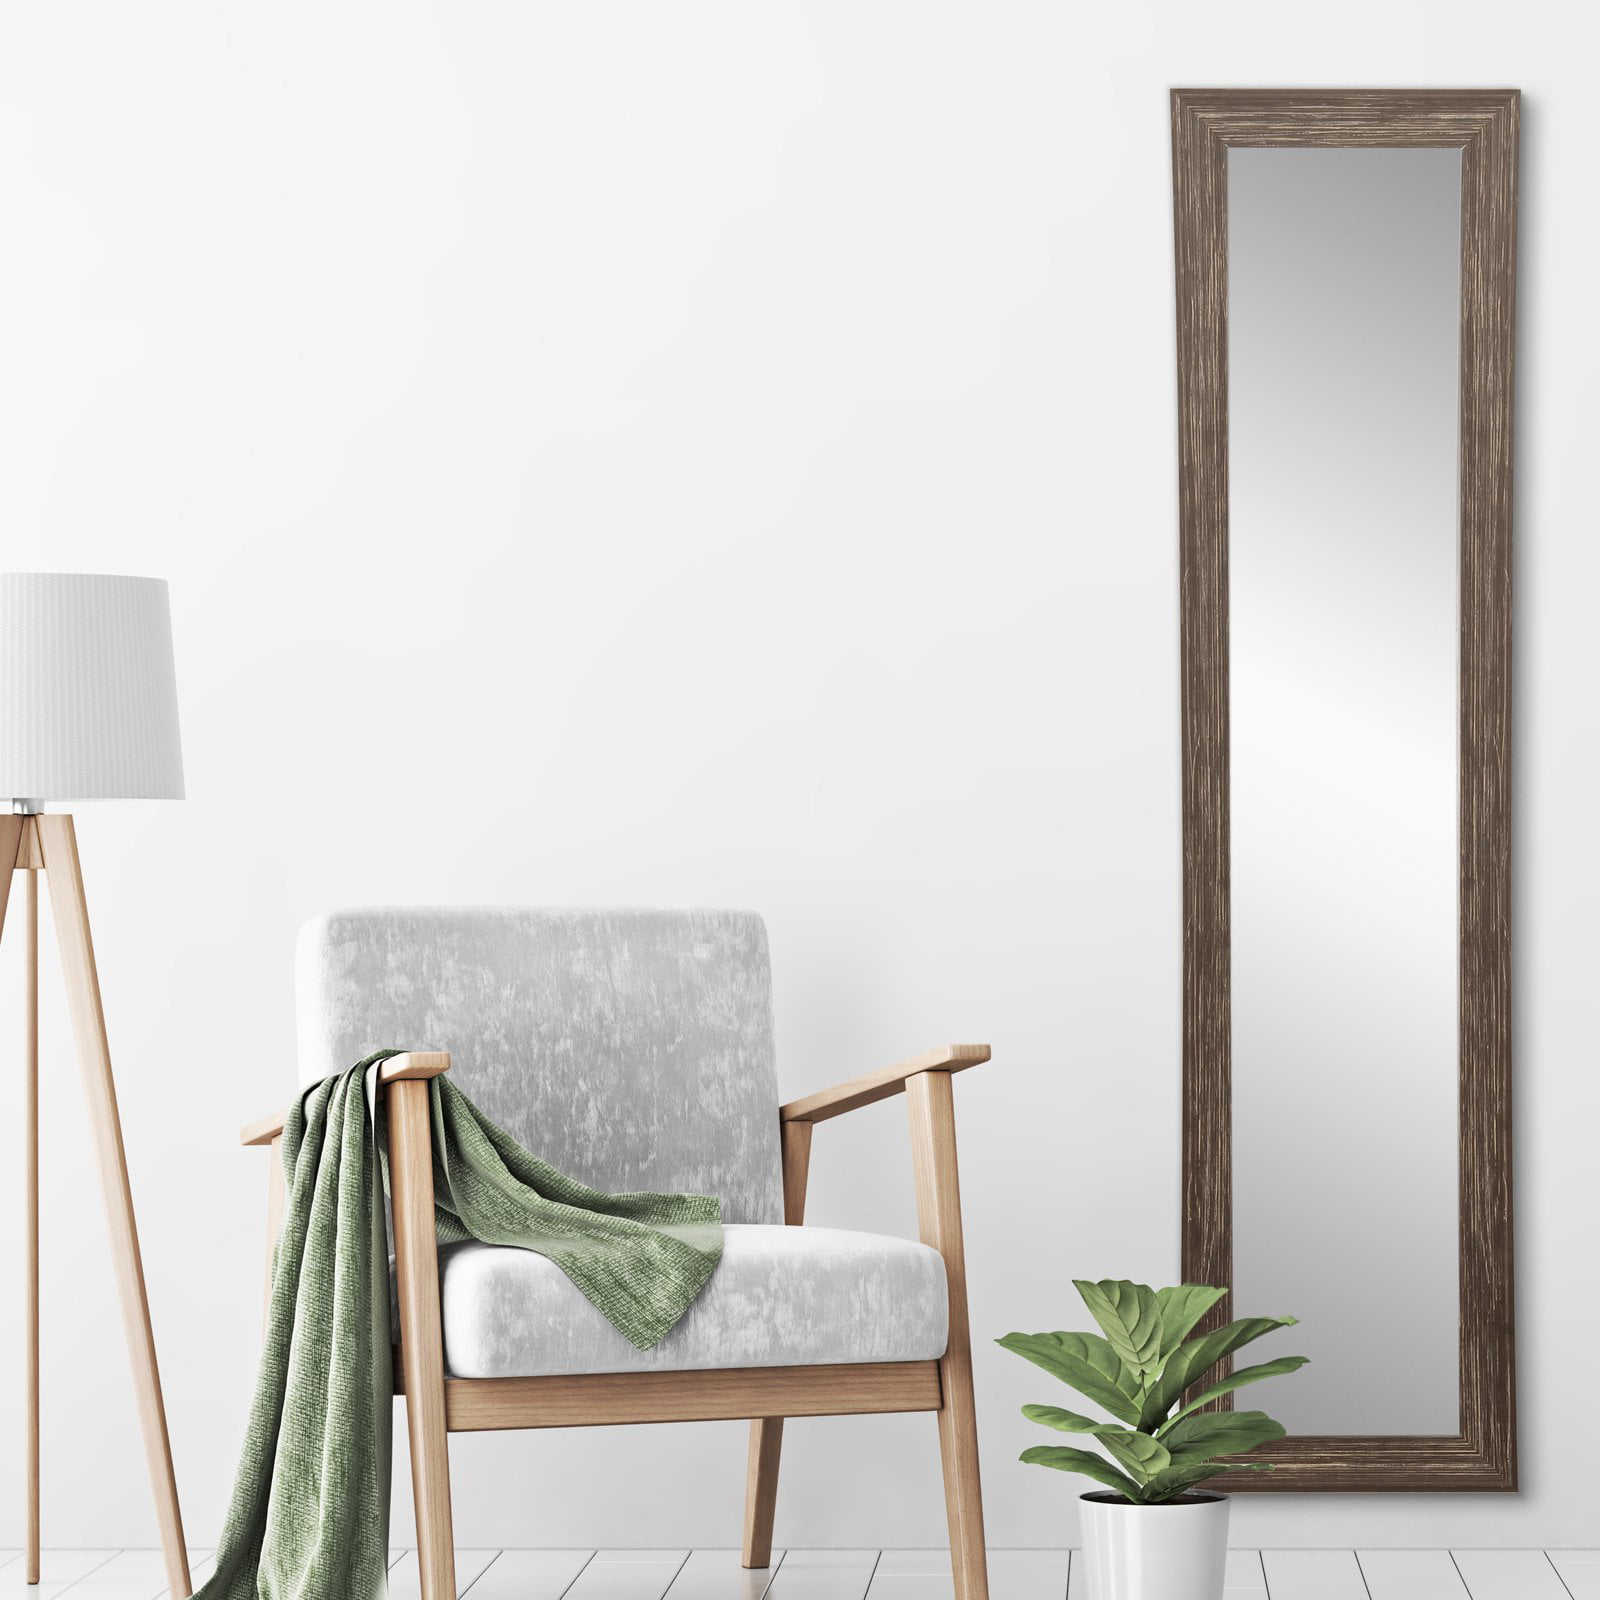 Distressed Floor Mirror: A Reflection Of Timeless Beauty